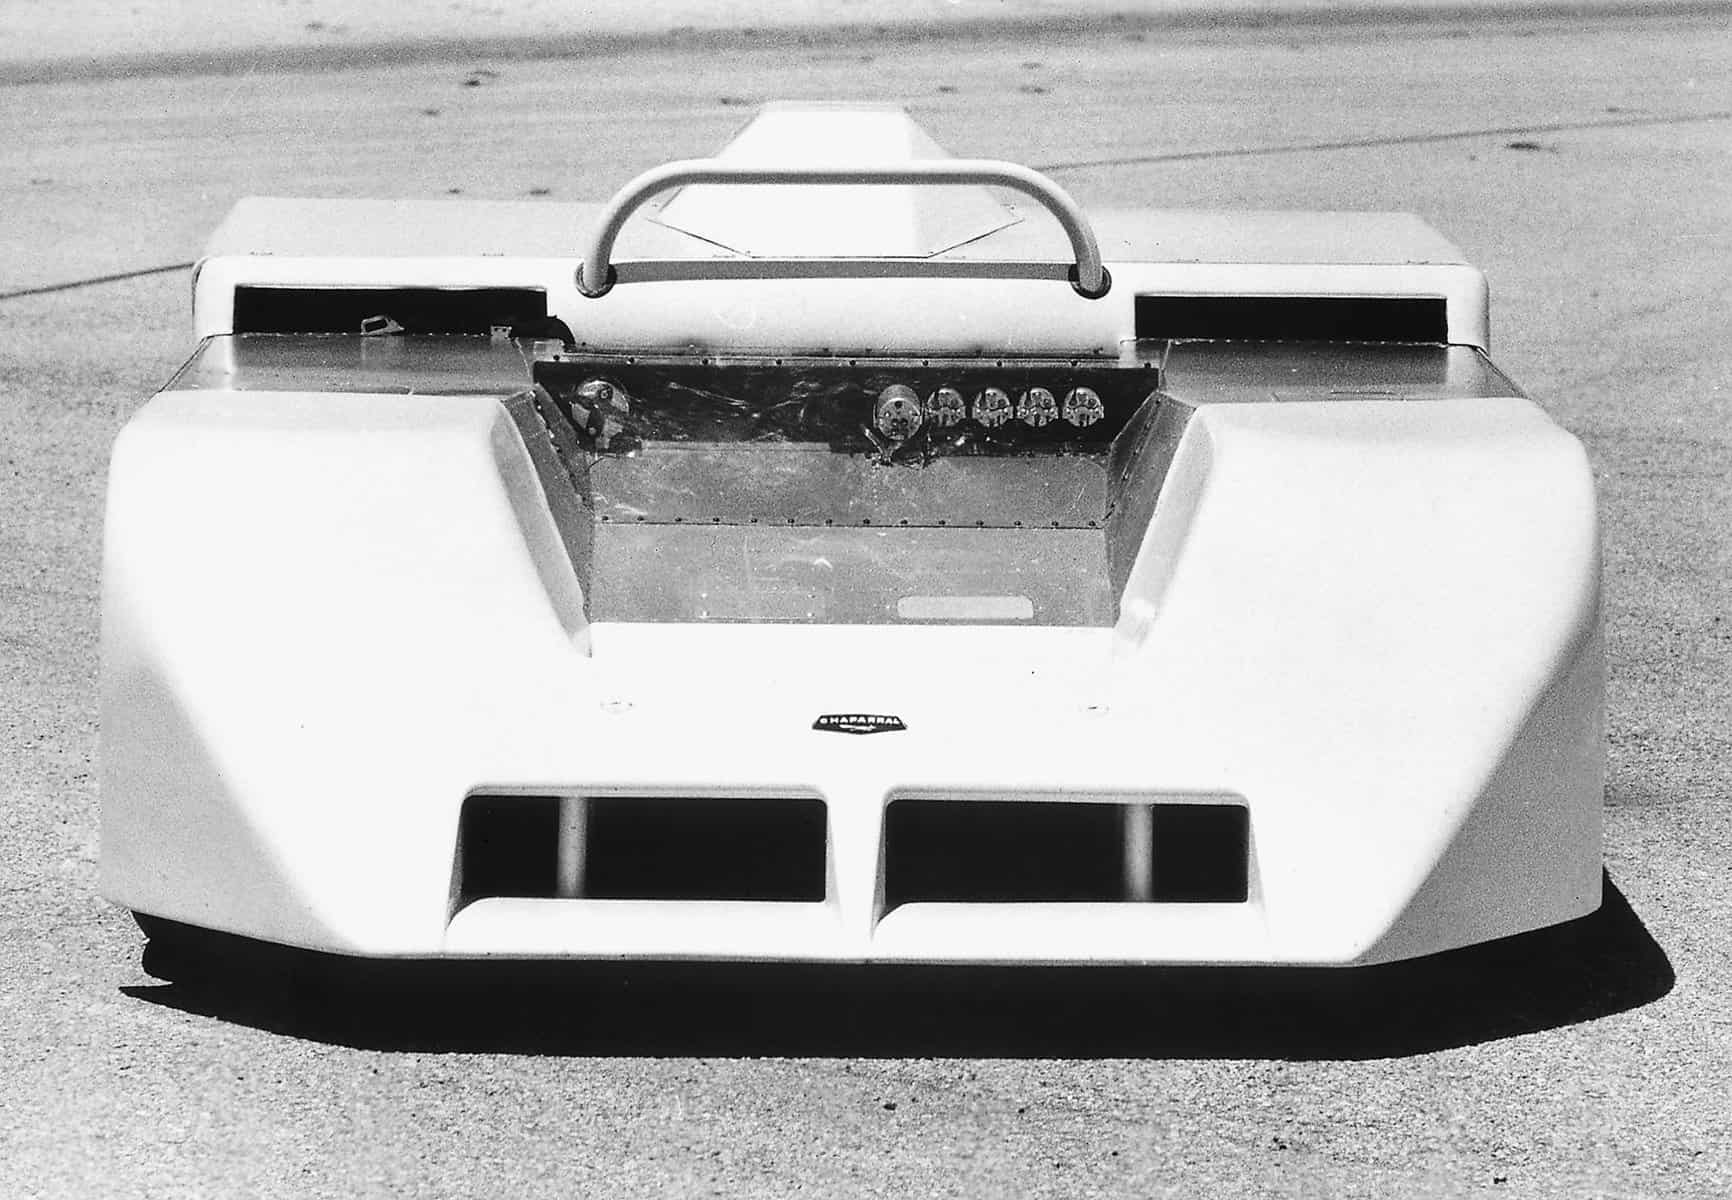 The Chaparral 2J: The Can-Am series had seen nothing like it!